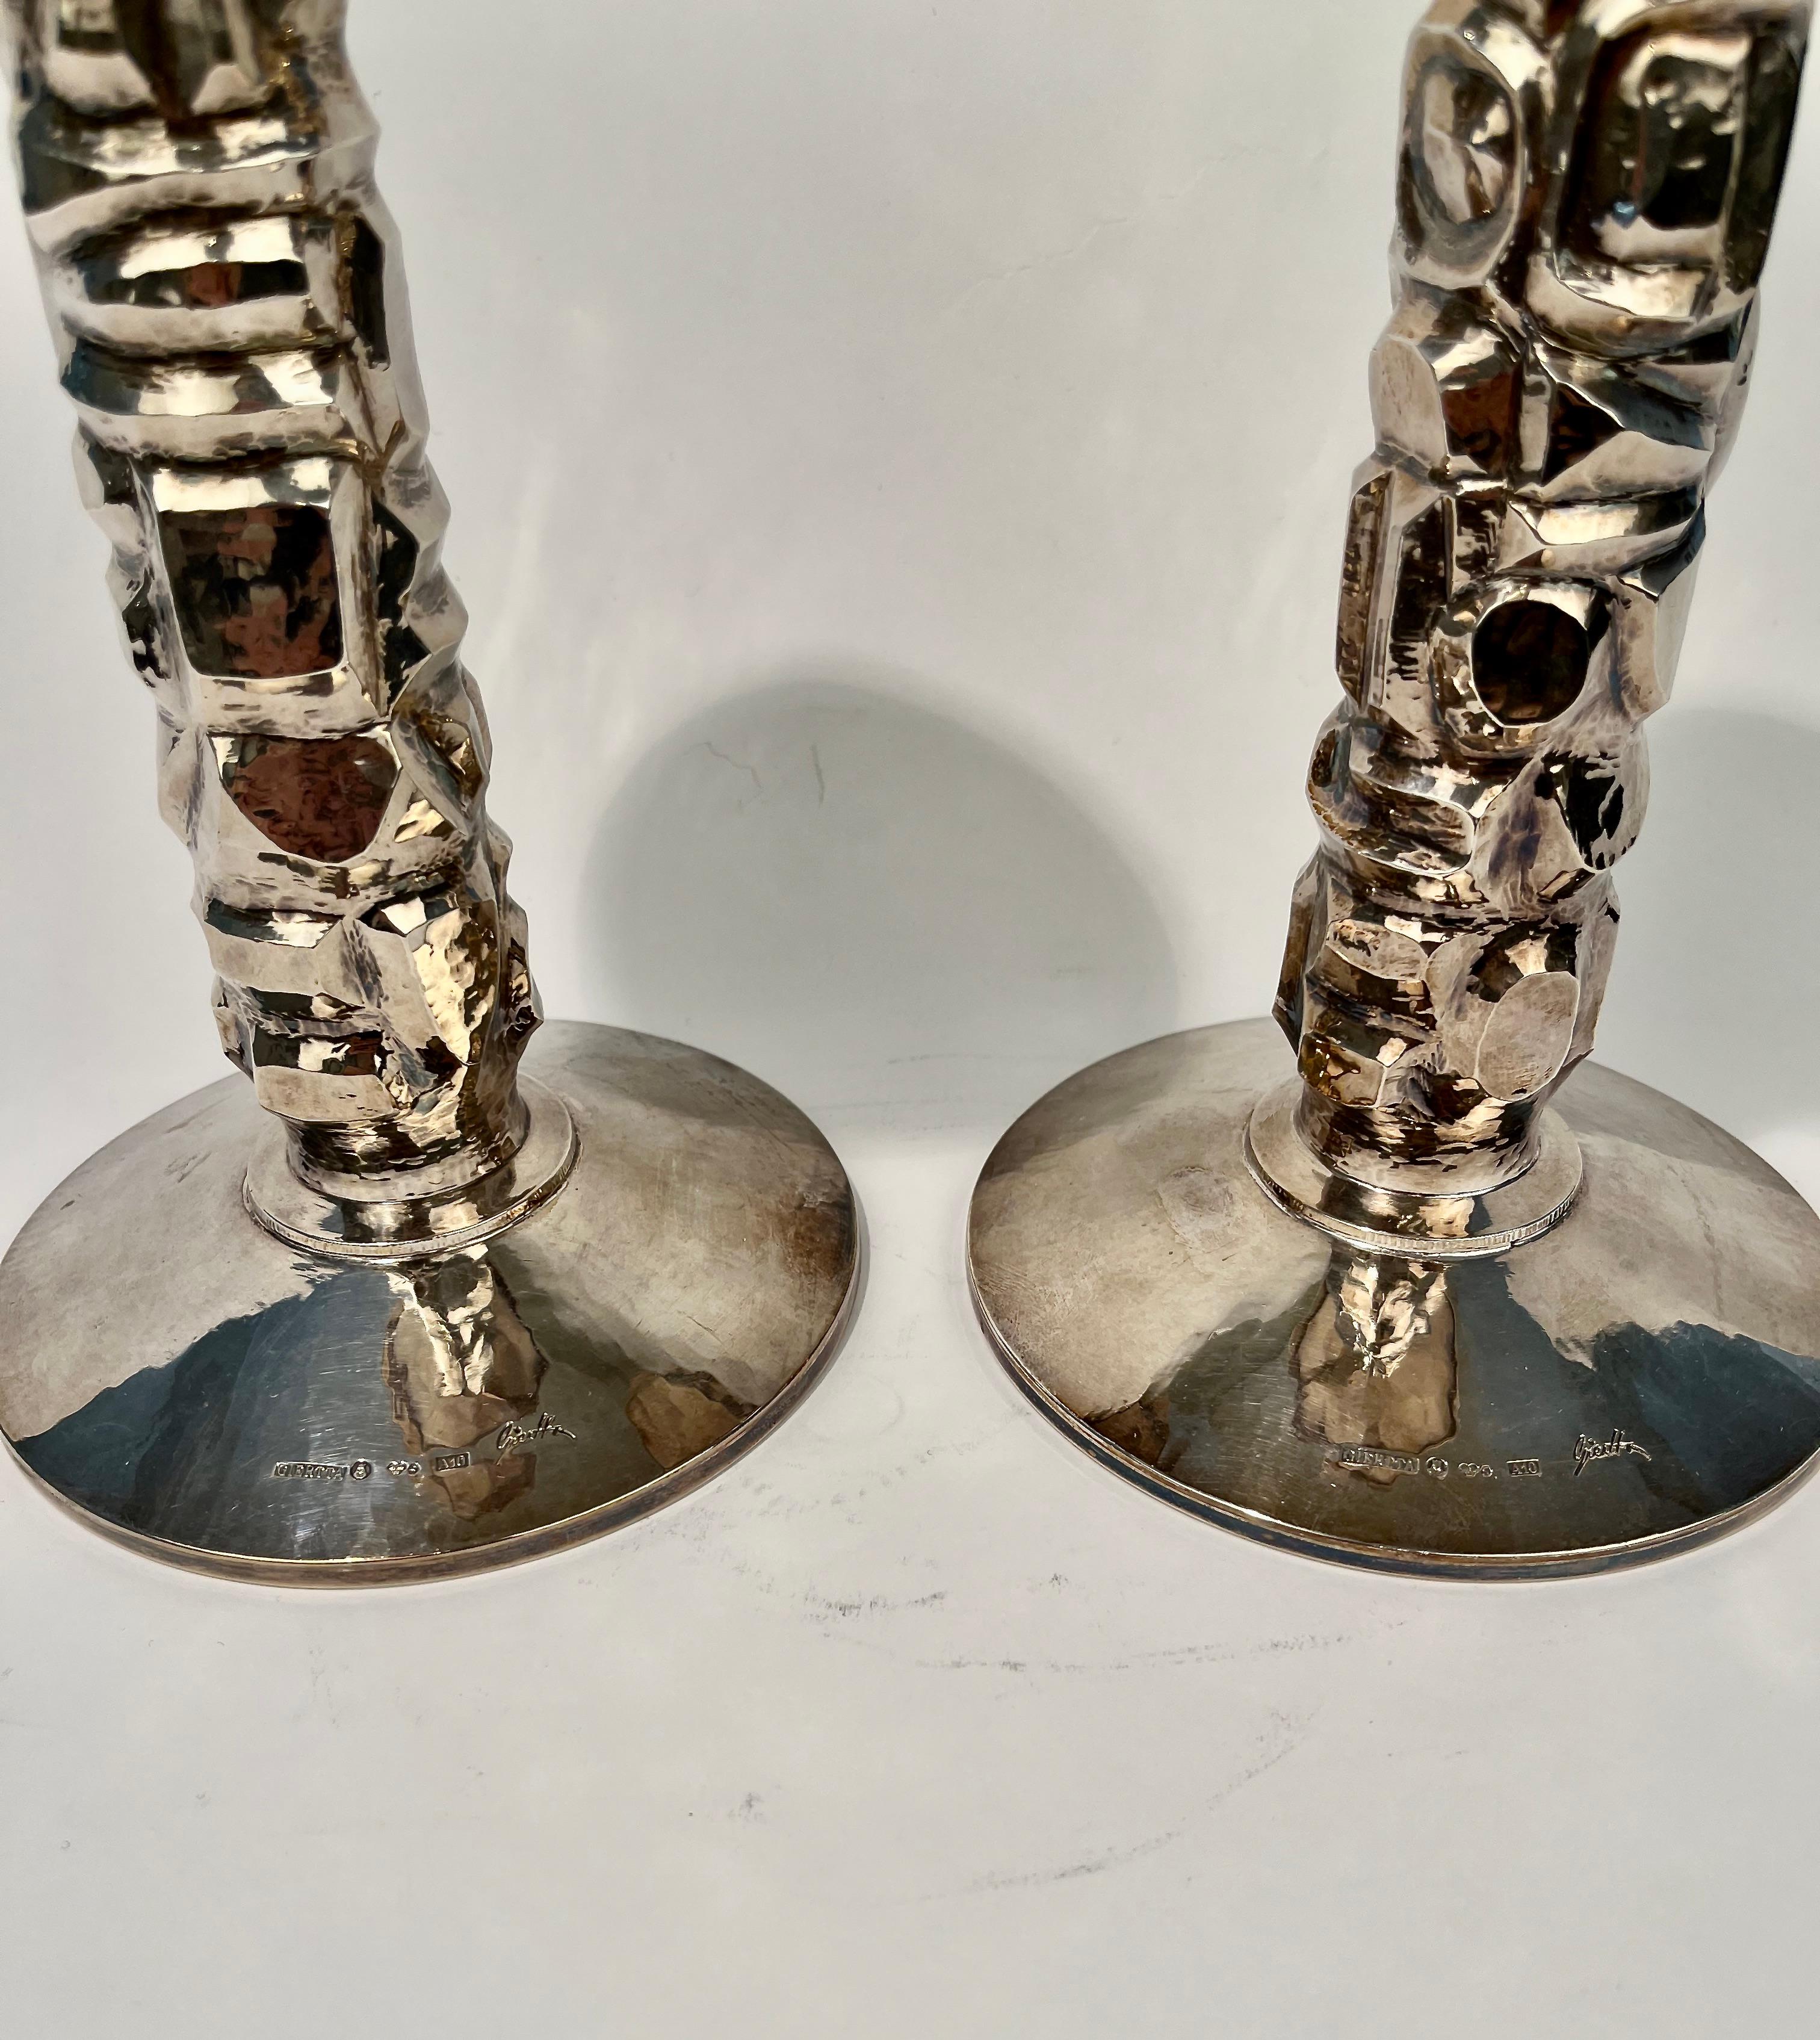 Silver candle sticks designed by Claes E Giertta. 
A Swedish nobleman and silversmith 1926 - 2007.